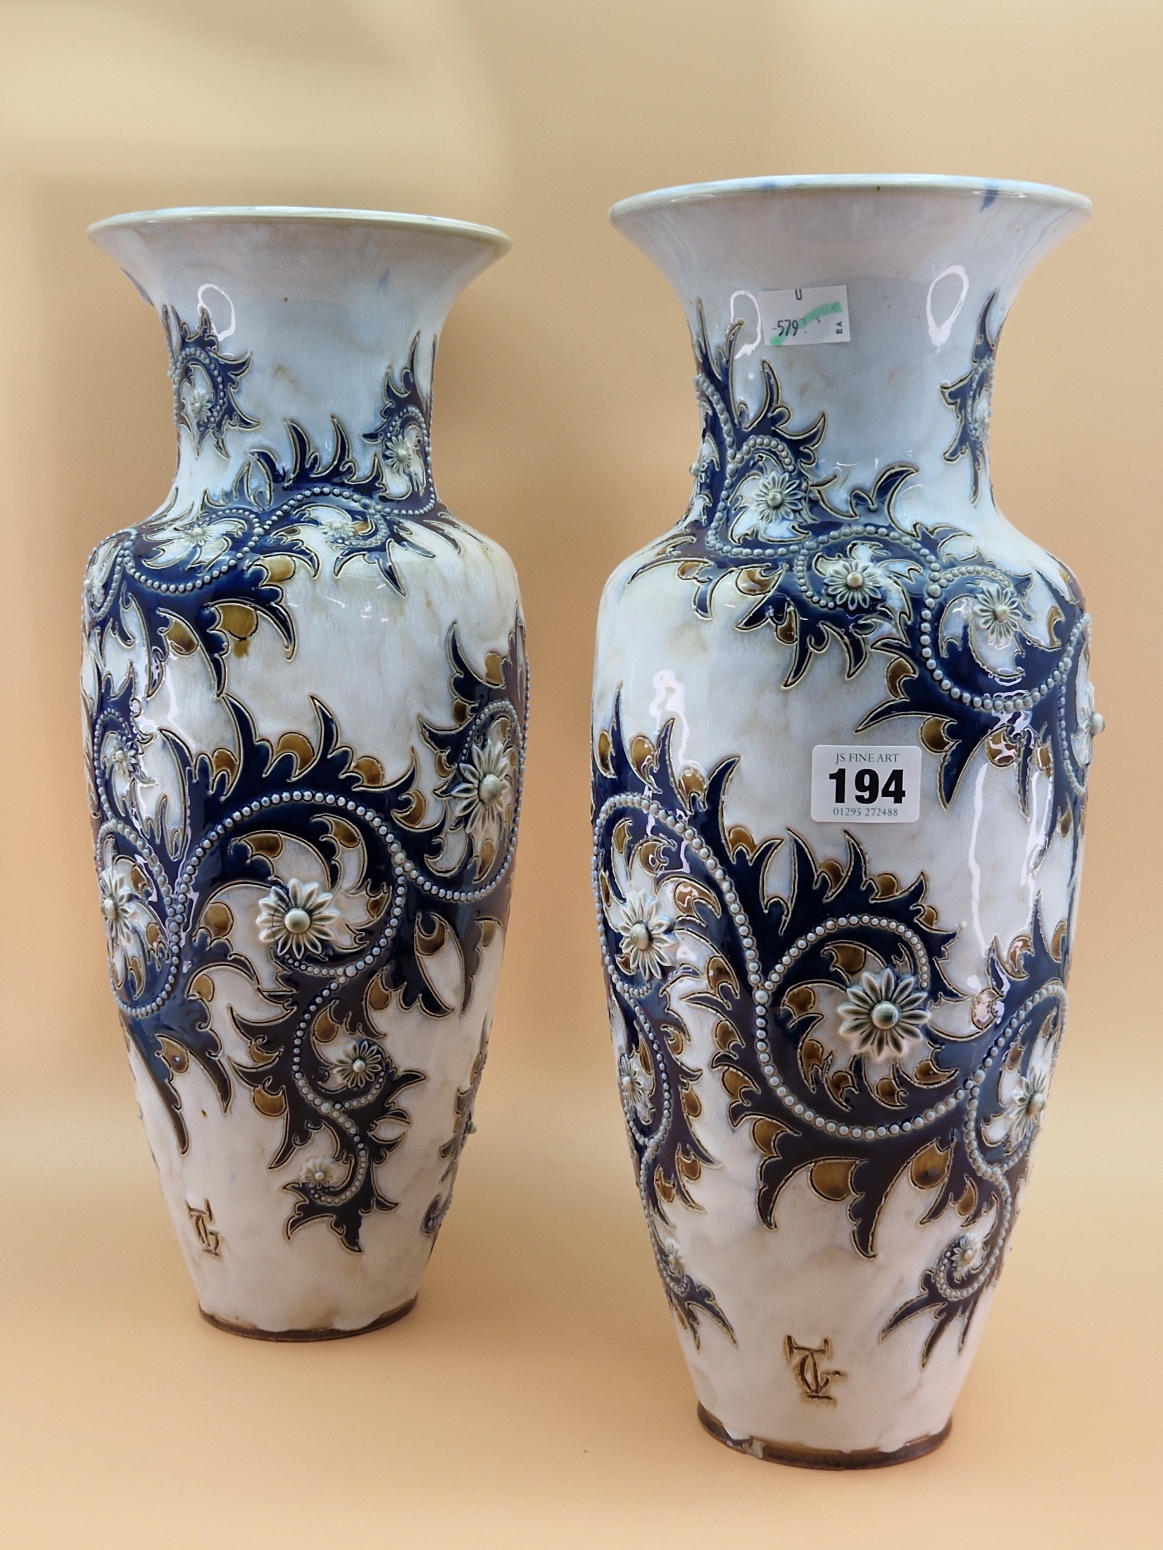 A PAIR OF ROYAL DOULTON VASES BY GEORGE TINWORTH DECORATED IN RELIEF WITH BEADED BLUE VINES - Image 2 of 8